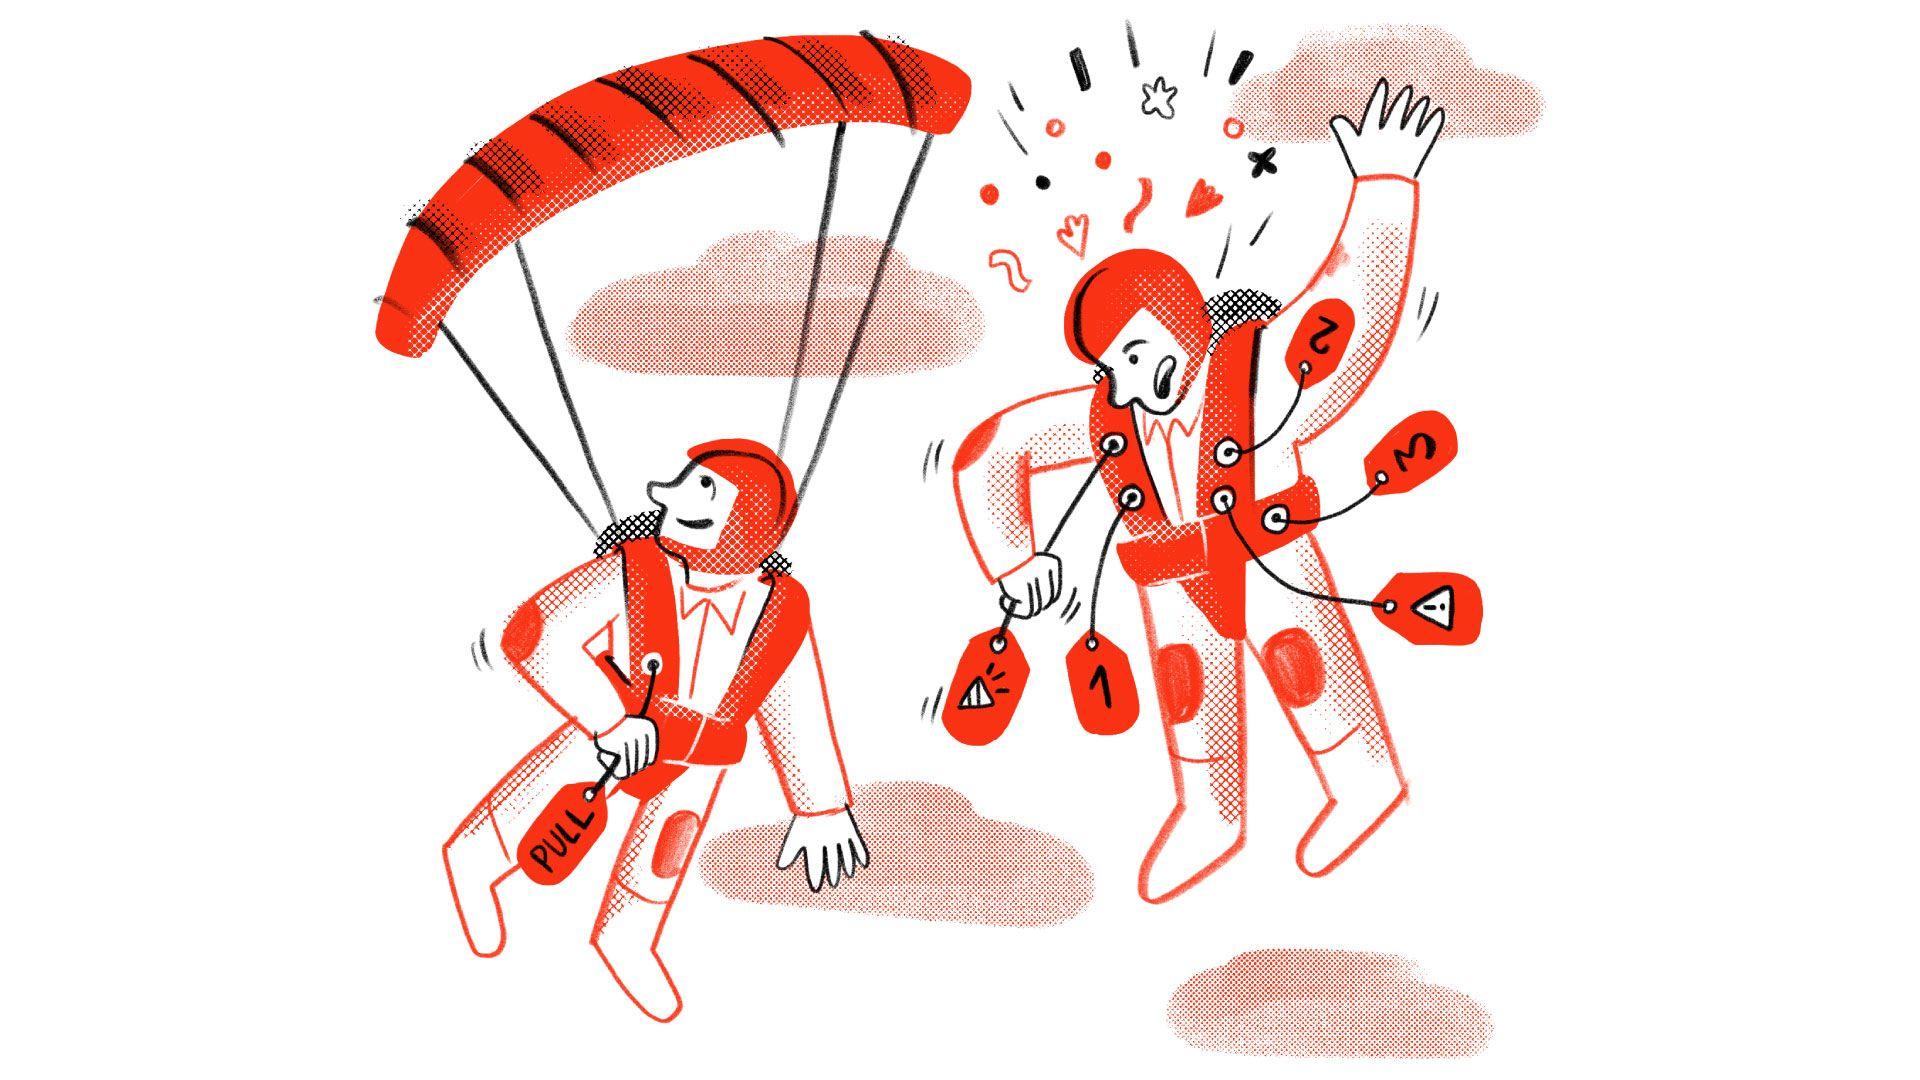 Cartoon of two skydivers where one has issues with opening the parachute